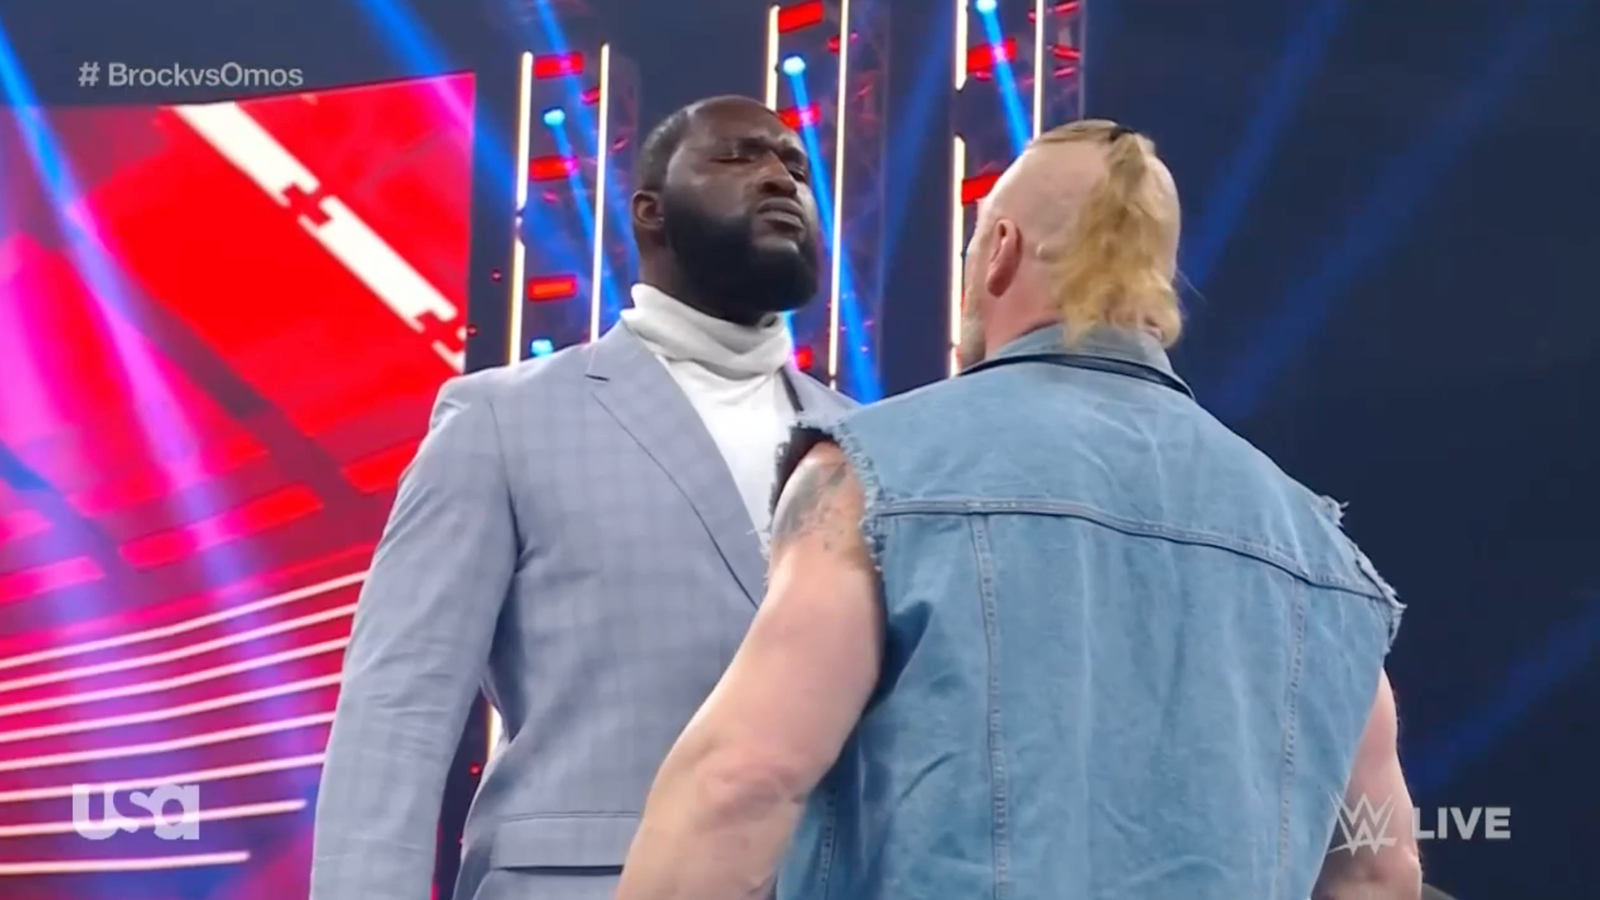 Omos tosses Brock Lesnar over the ropes ahead of the WrestleMania showdown